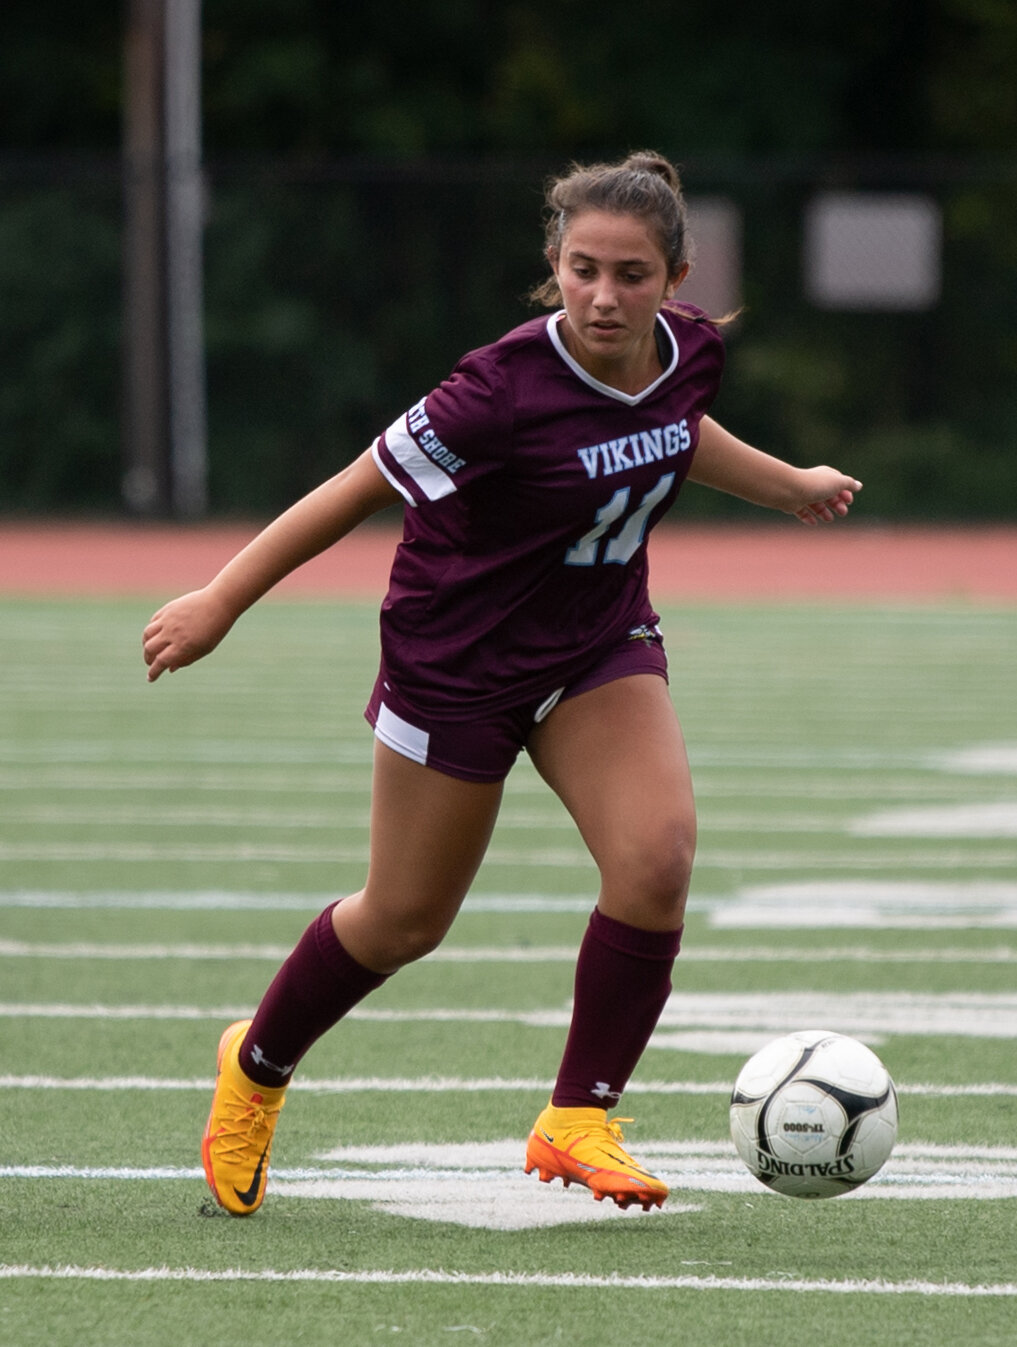 The Vikings will lean heavily on the talent and leadership of midfielder Sofia Martini, who is making a move to bolster the defense.